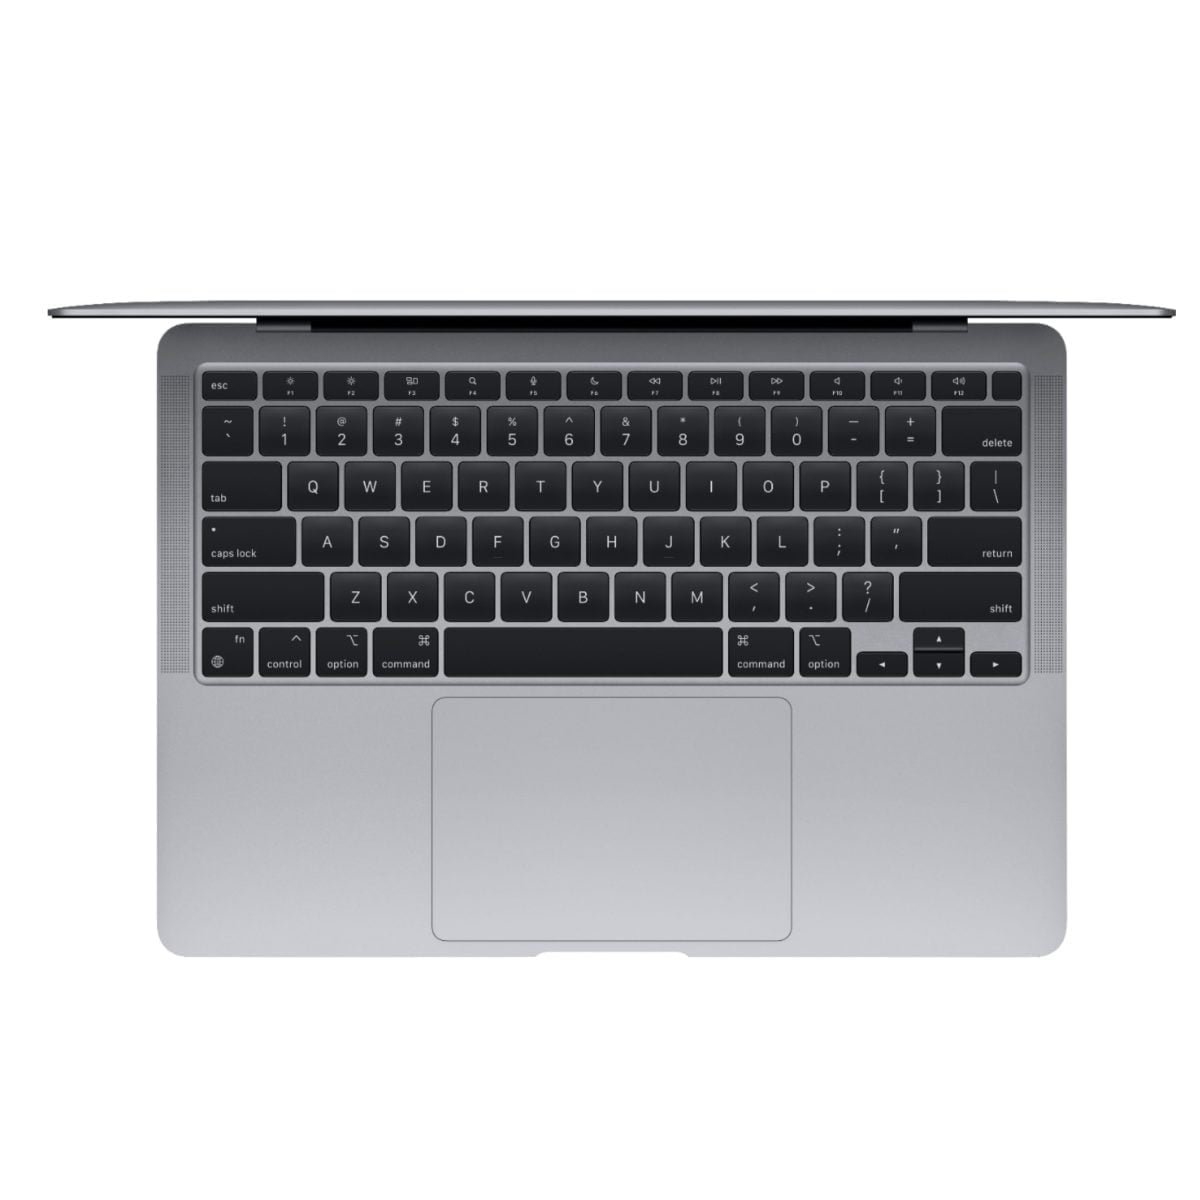 5721600Cv11D Scaled Apple &Lt;H1 Class=&Quot;Heading-5 V-Fw-Regular&Quot;&Gt;Macbook Air 13&Quot; Laptop - Apple M1 Chip - 8Gb Memory - 256Gb Ssd (Latest Model) - Space Gray (English Keyboard)&Lt;/H1&Gt; Https://Www.youtube.com/Watch?V=Hs1Hols4Sd0 Apple’s Thinnest And Lightest Notebook Gets Supercharged With The Apple M1 Chip. Tackle Your Projects With The Blazing-Fast 8-Core Cpu. Take Graphics-Intensive Apps And Games To The Next Level With The 7-Core Gpu. And Accelerate Machine Learning Tasks With The 16-Core Neural Engine. All With A Silent, Fanless Design And The Longest Battery Life Ever — Up To 18 Hours. Macbook Air. Still Perfectly Portable. Just A Lot More Powerful. Macbook Air 13 Macbook Air 13&Quot; Laptop - Apple M1 Chip - 8Gb Memory - 256Gb Ssd (Mgnd3) - Space Gray